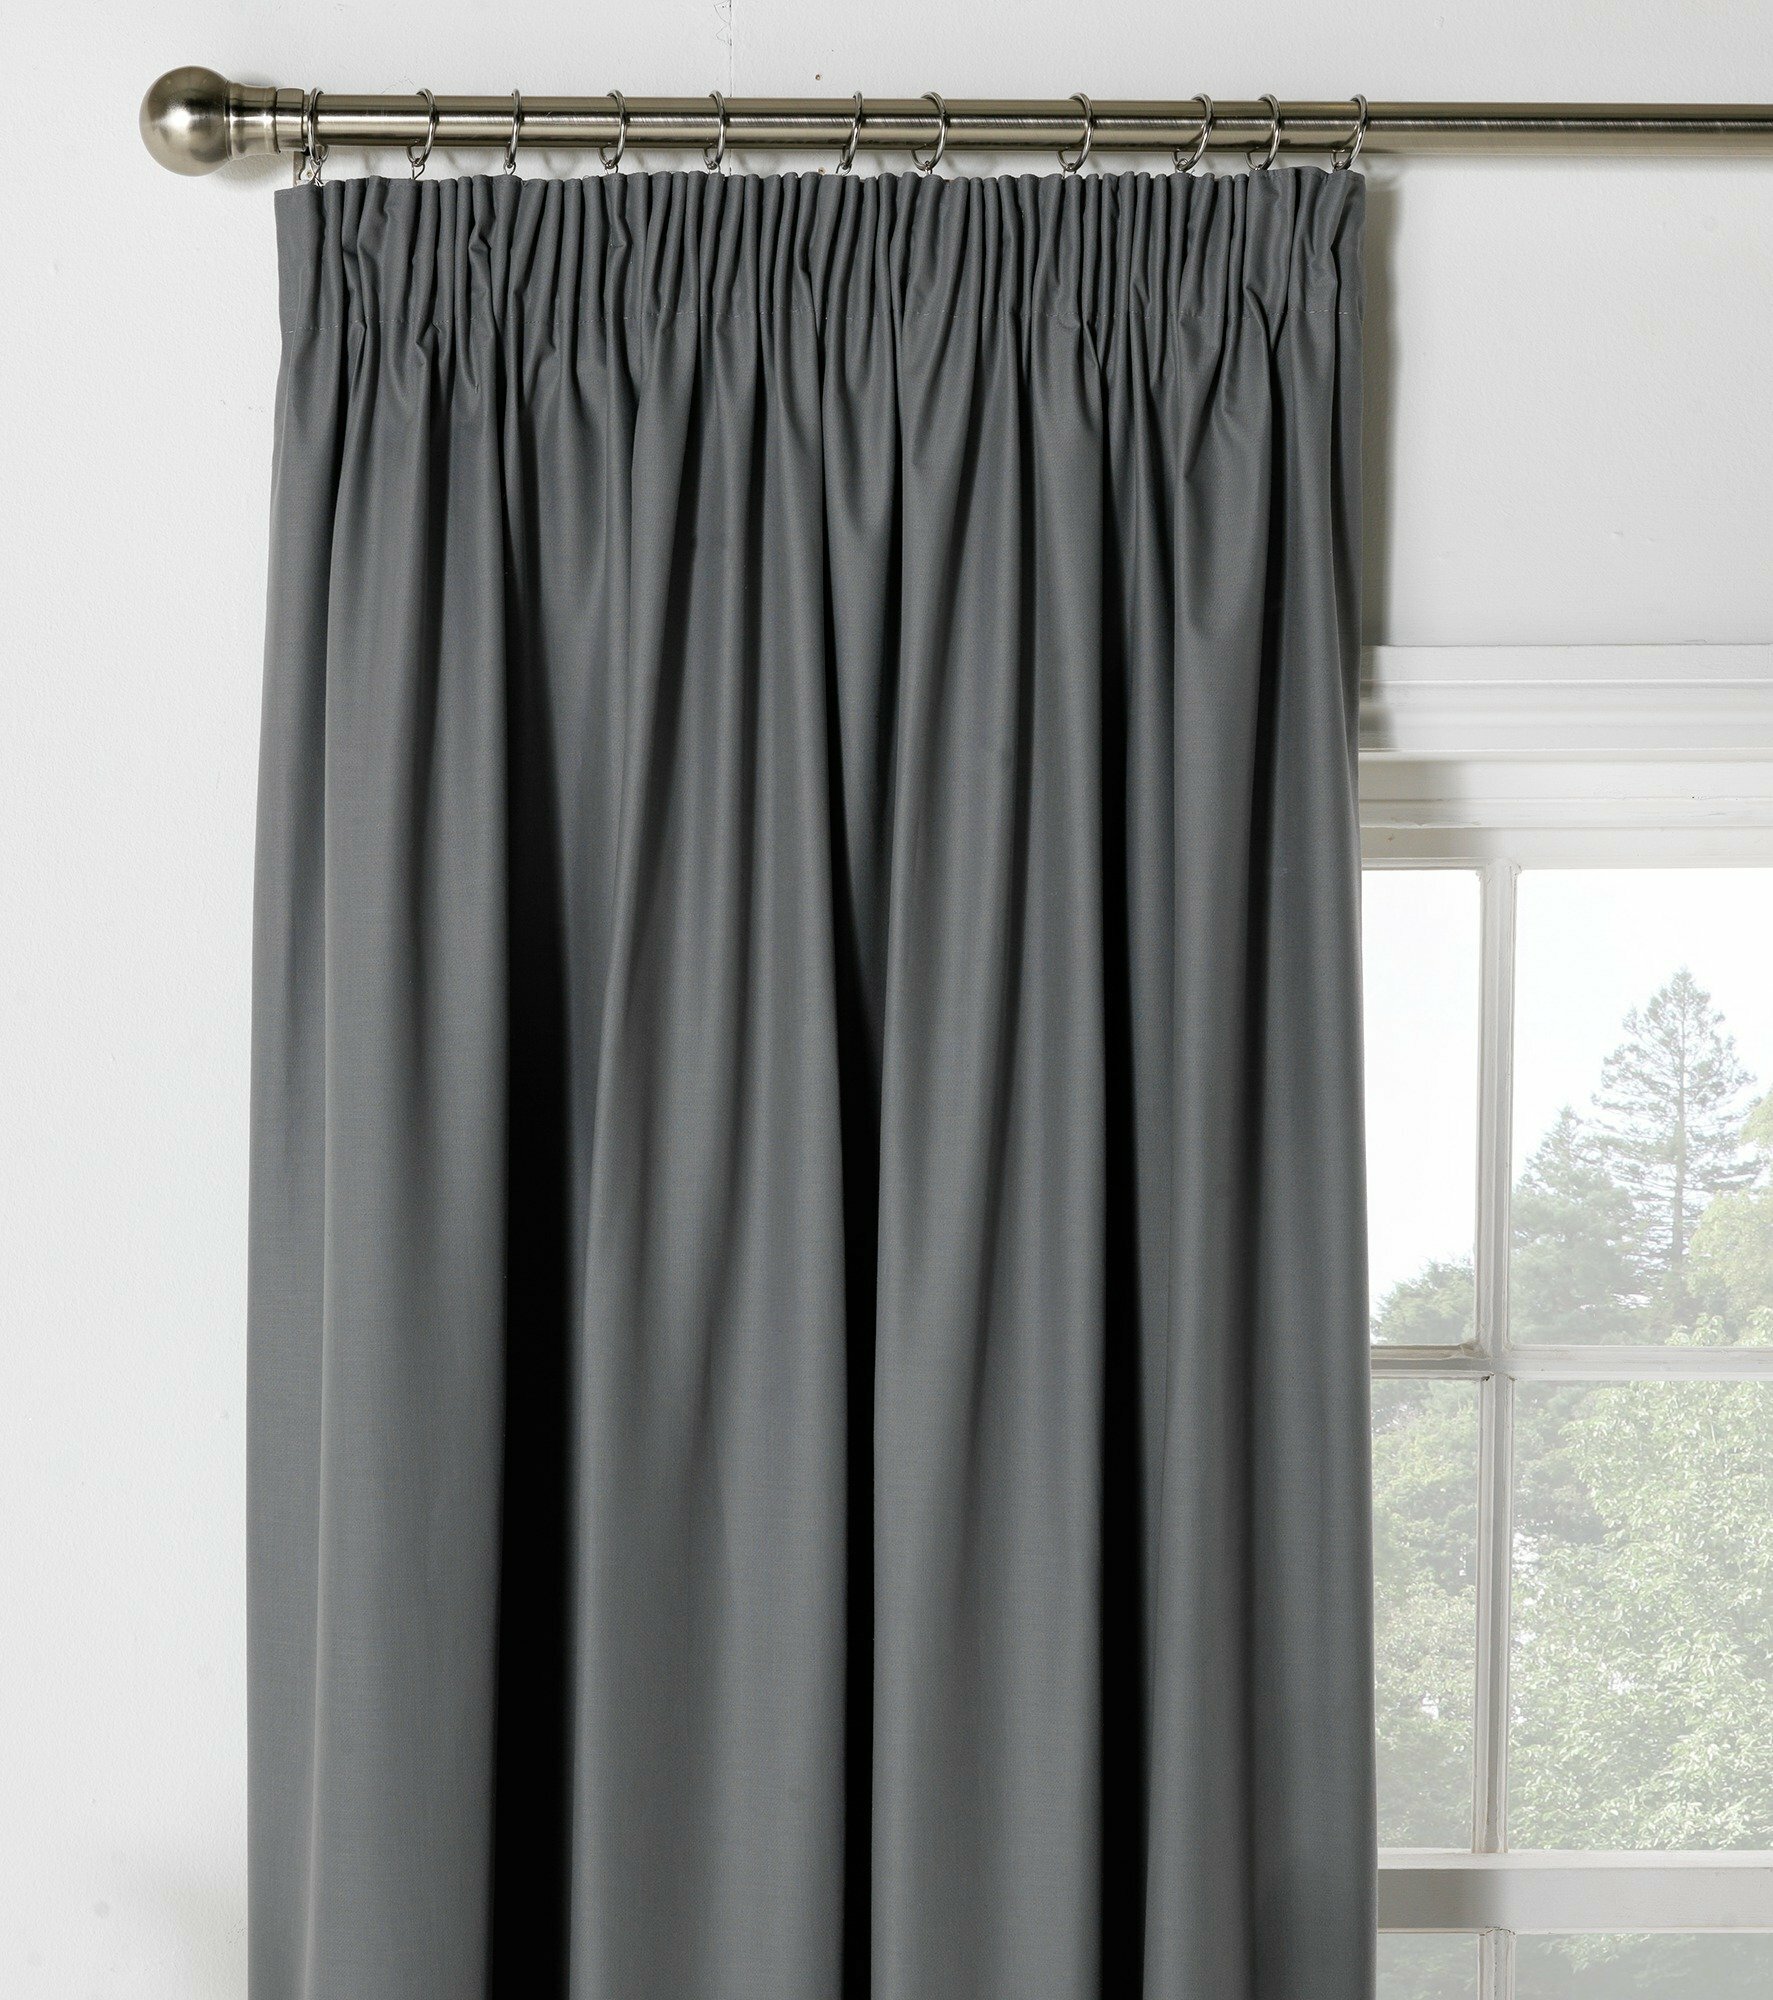 Shower Curtain Tension Rod | Mounted Shower Curtain Rod | Extra Long Shower Curtain Rod Tension